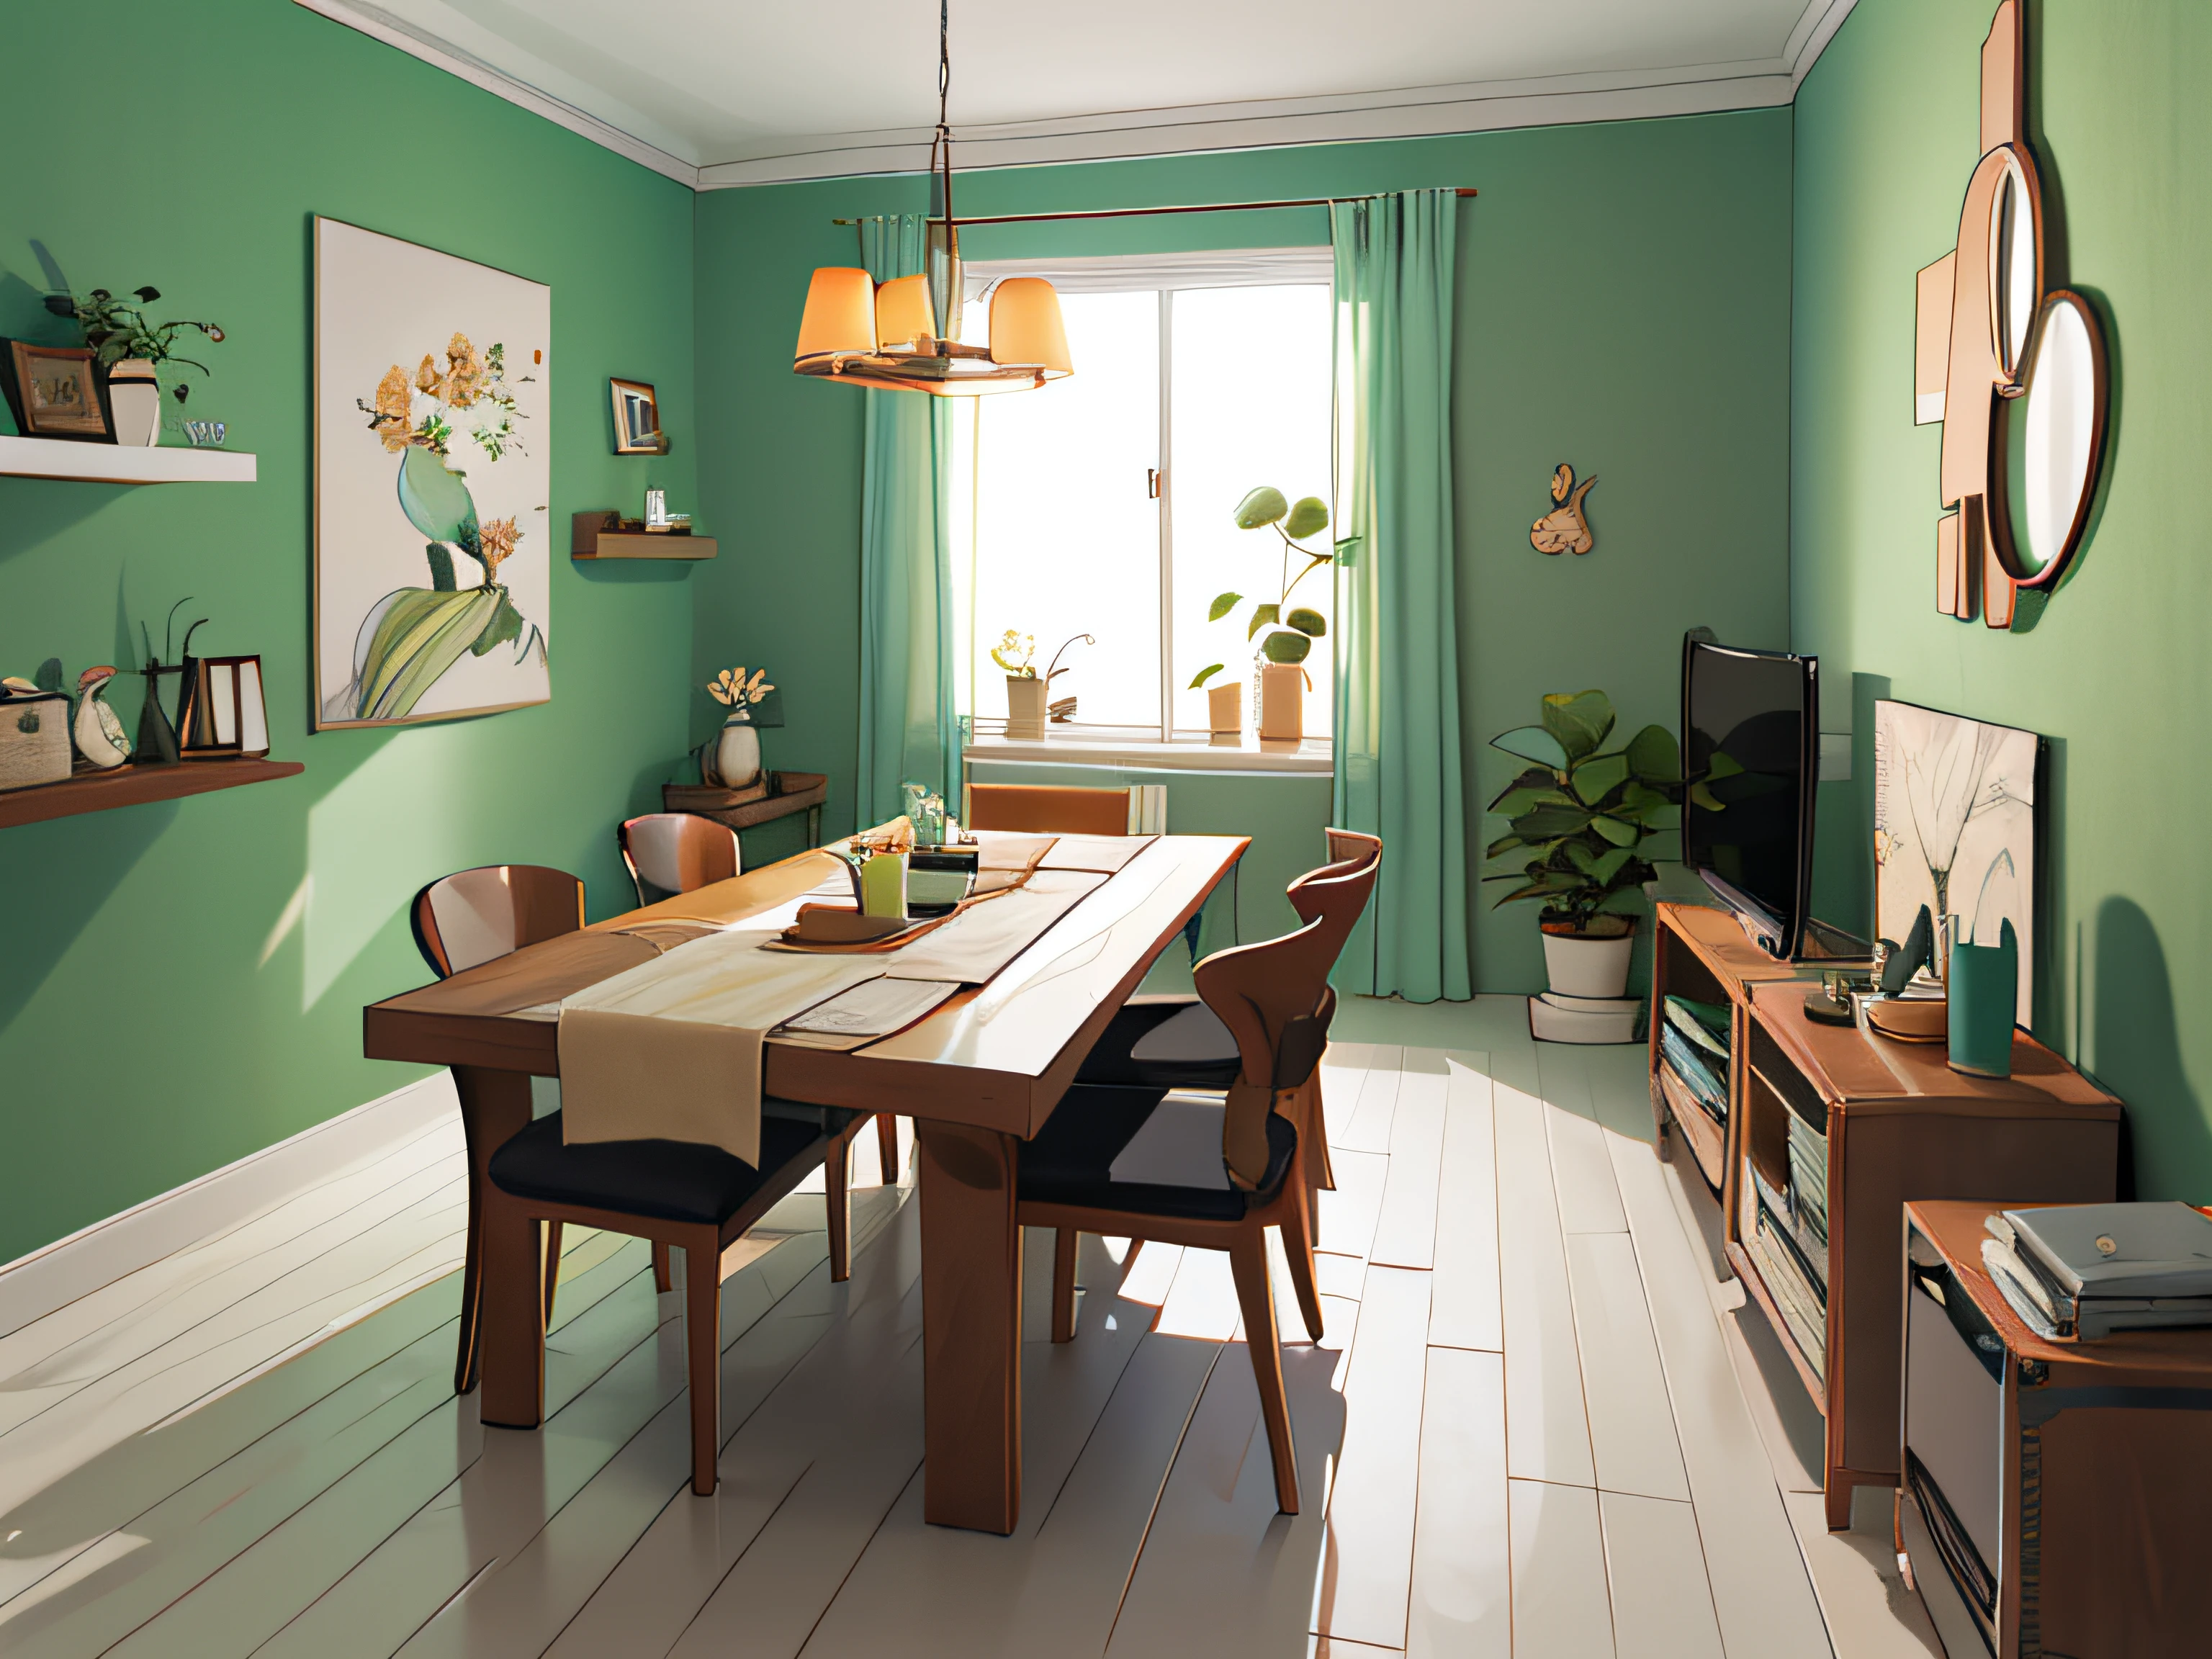 simple and beautiful dining room, Simple style: 1.2, white wall, pictures and plants  ,